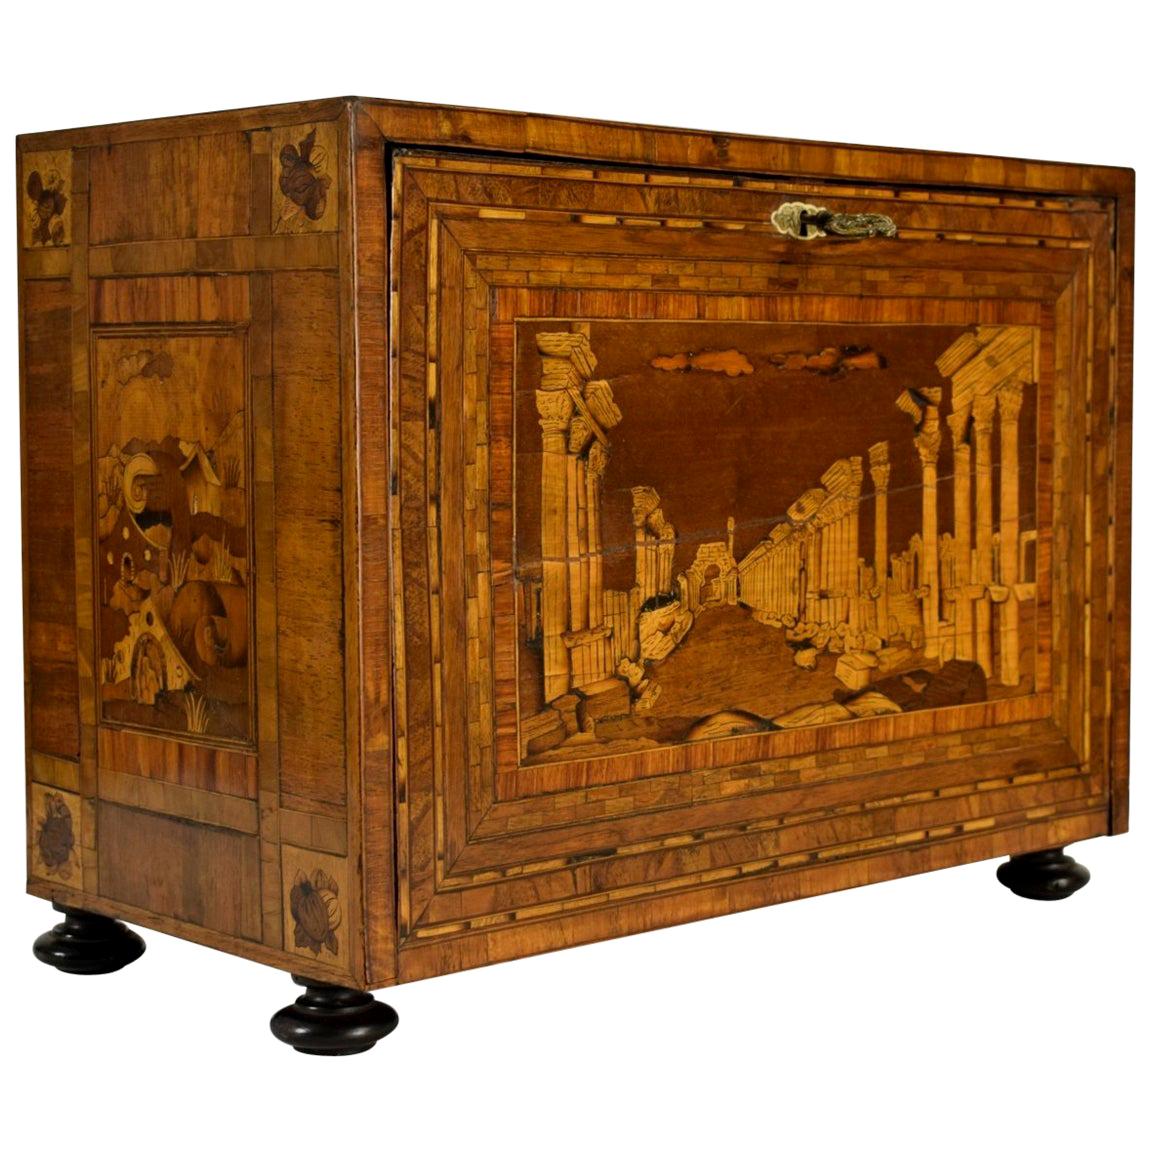  17th Century, German Wood Apothecary Cabinet with Fantasy Architectures